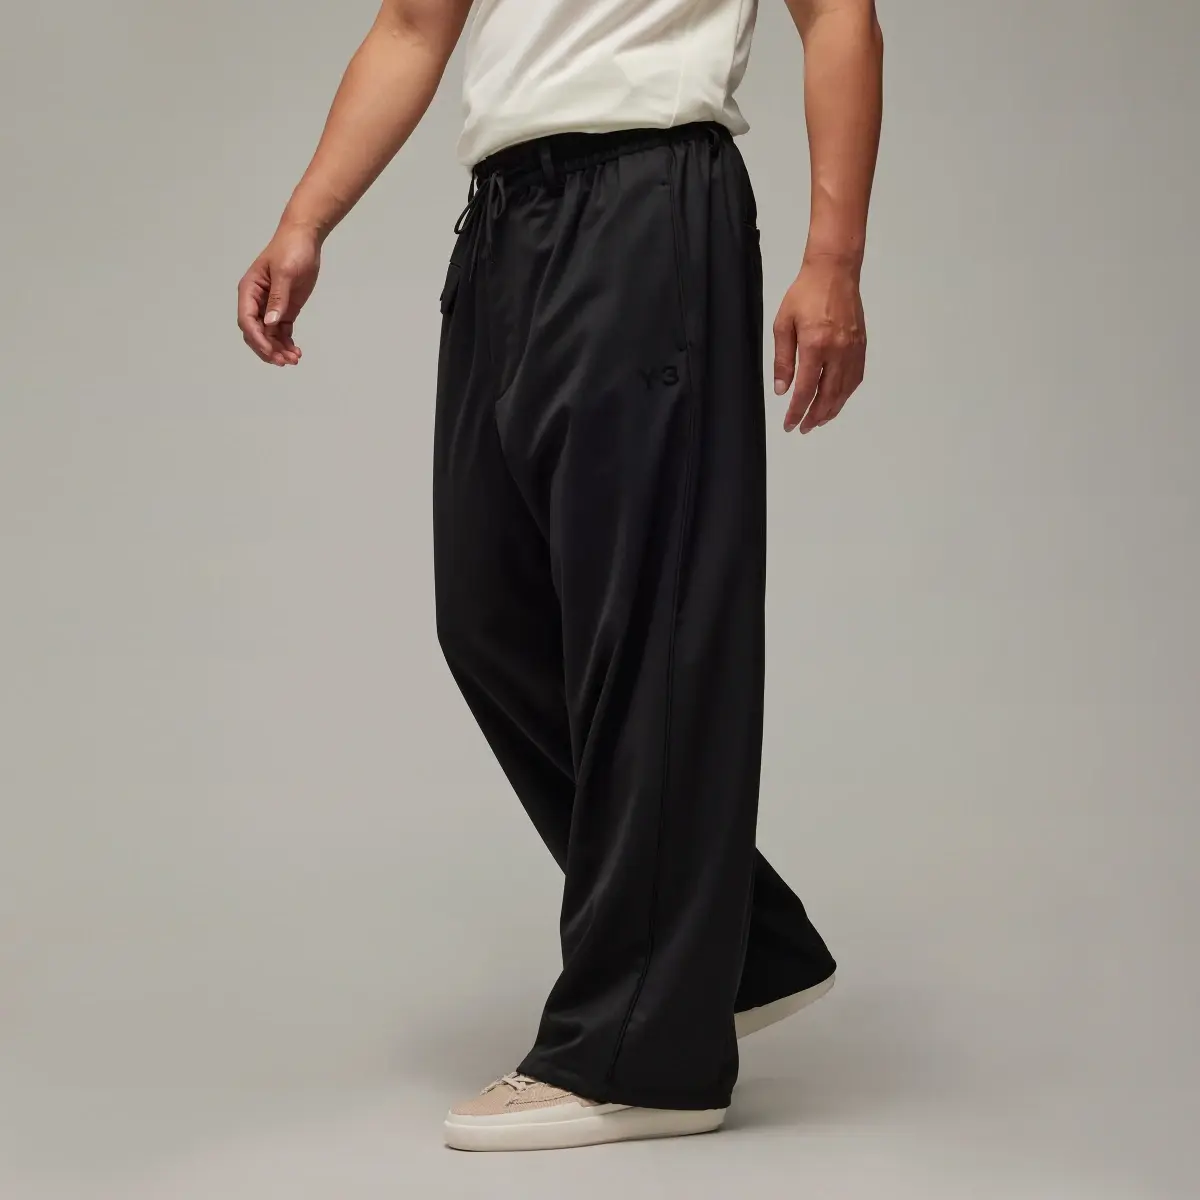 Adidas Y-3 Refined Woven Straight Leg Tracksuit Bottoms. 2